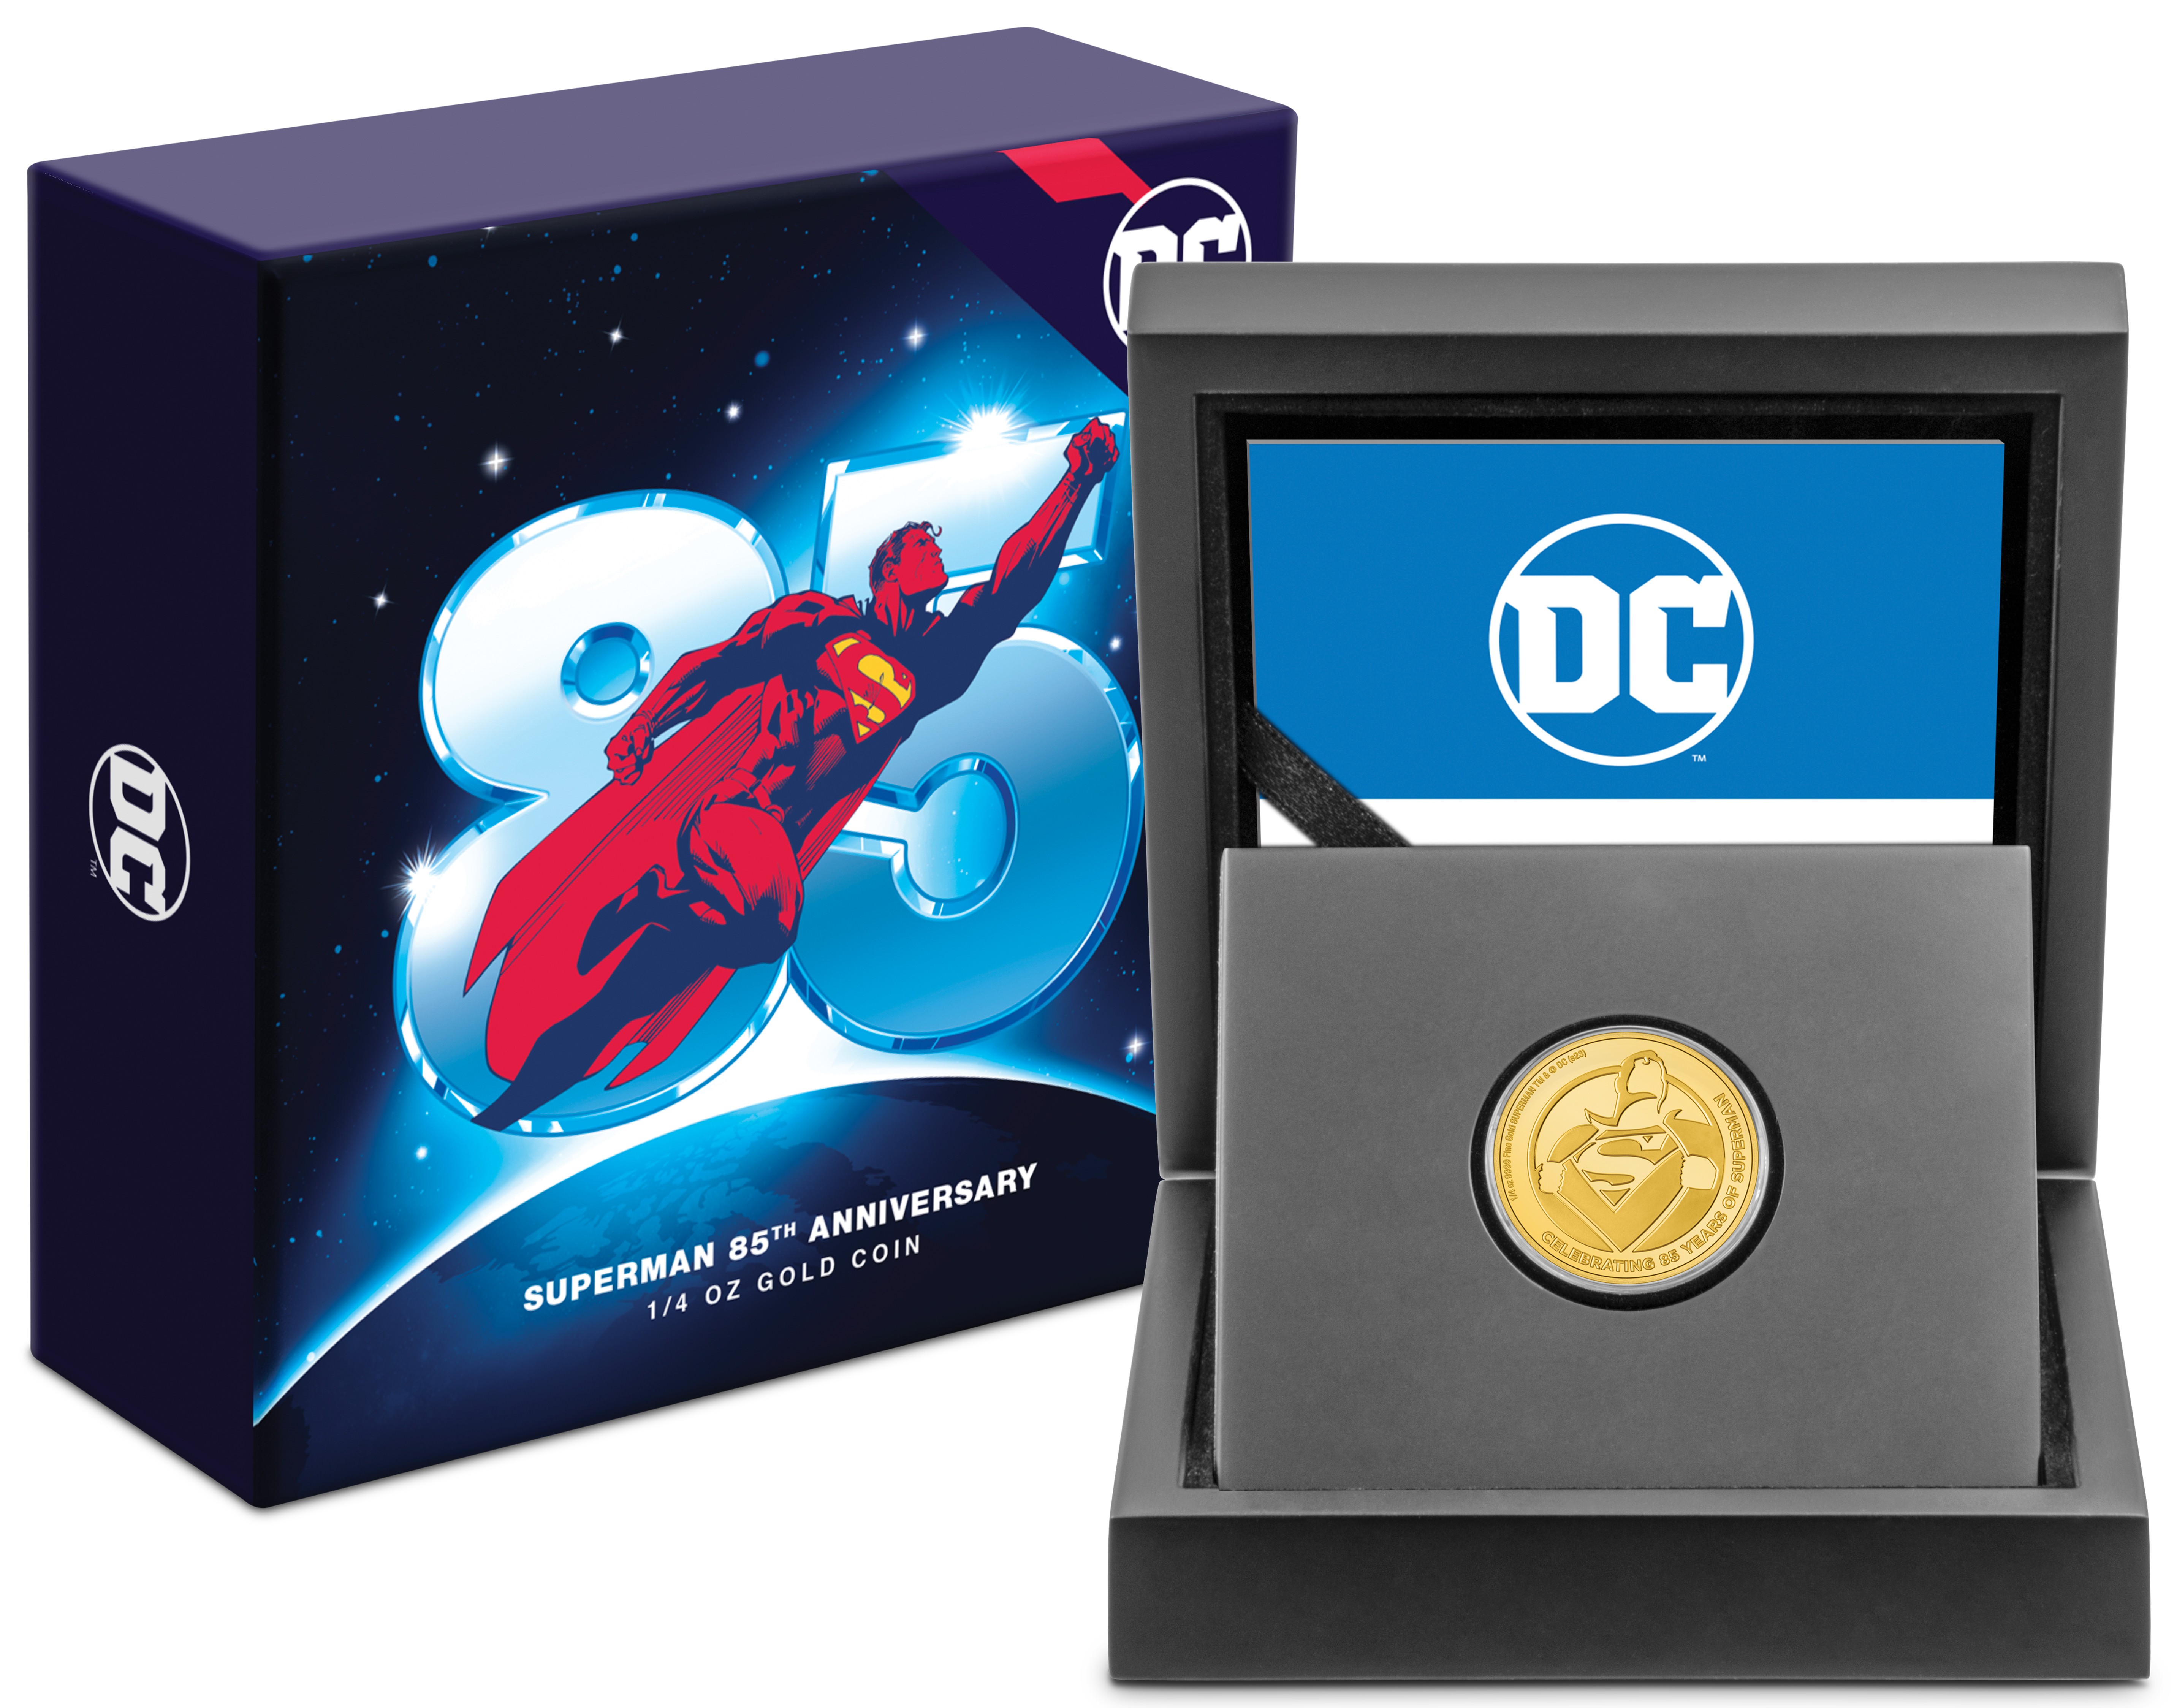 Superman 85th Anniversary ¼oz Gold Coin (Prototype Shown) View 8